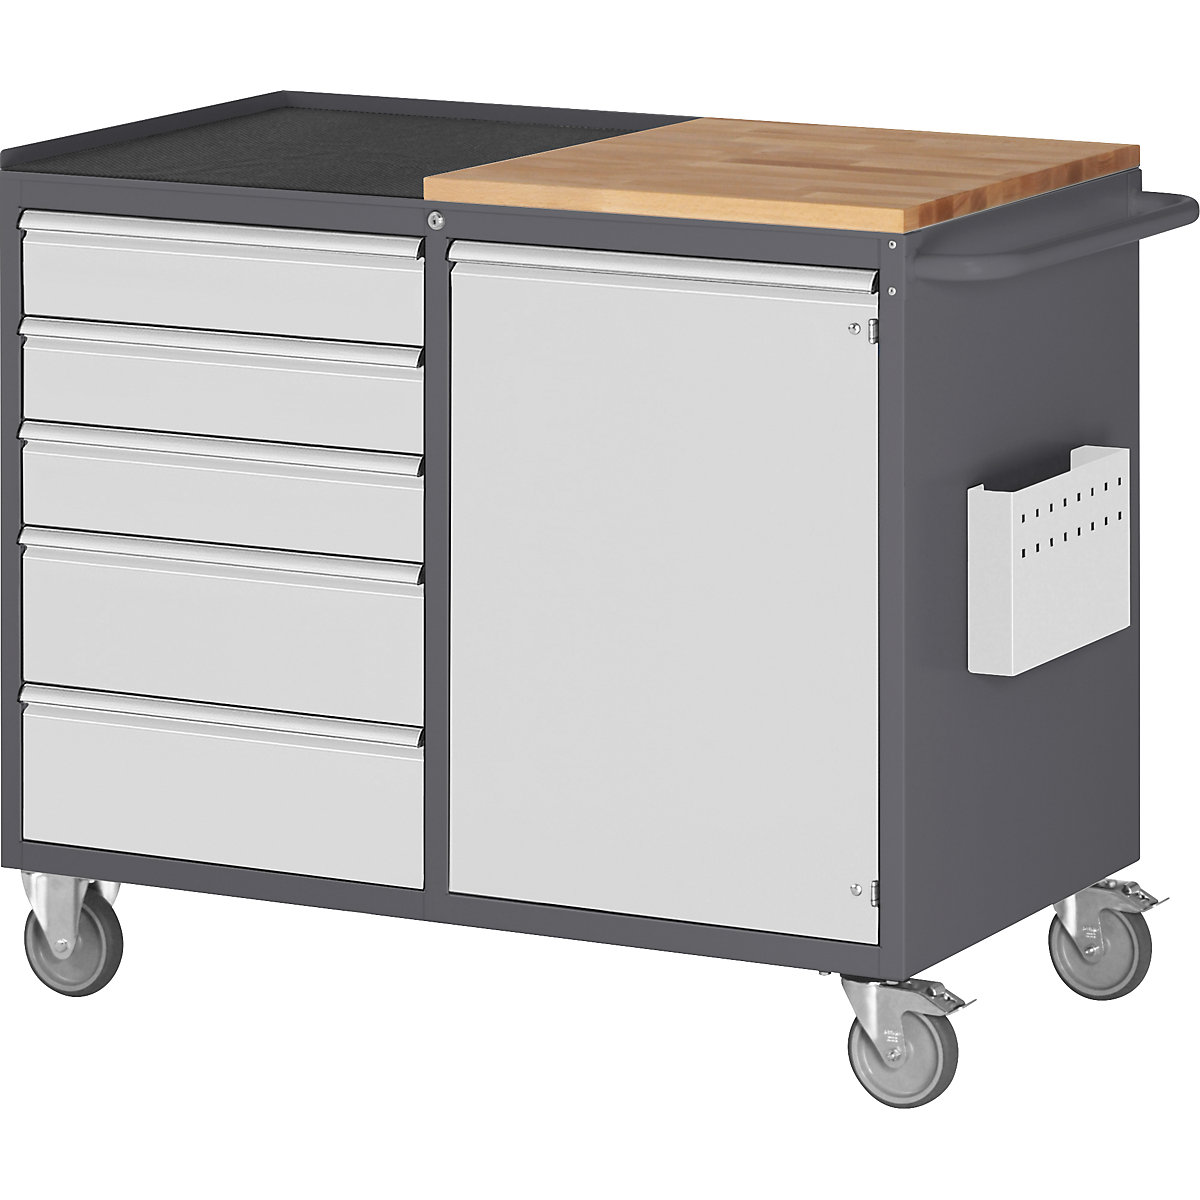 Compact workbenches, mobile – RAU, 5 drawers, 1 door, wood / metal work surface, charcoal / light grey-2